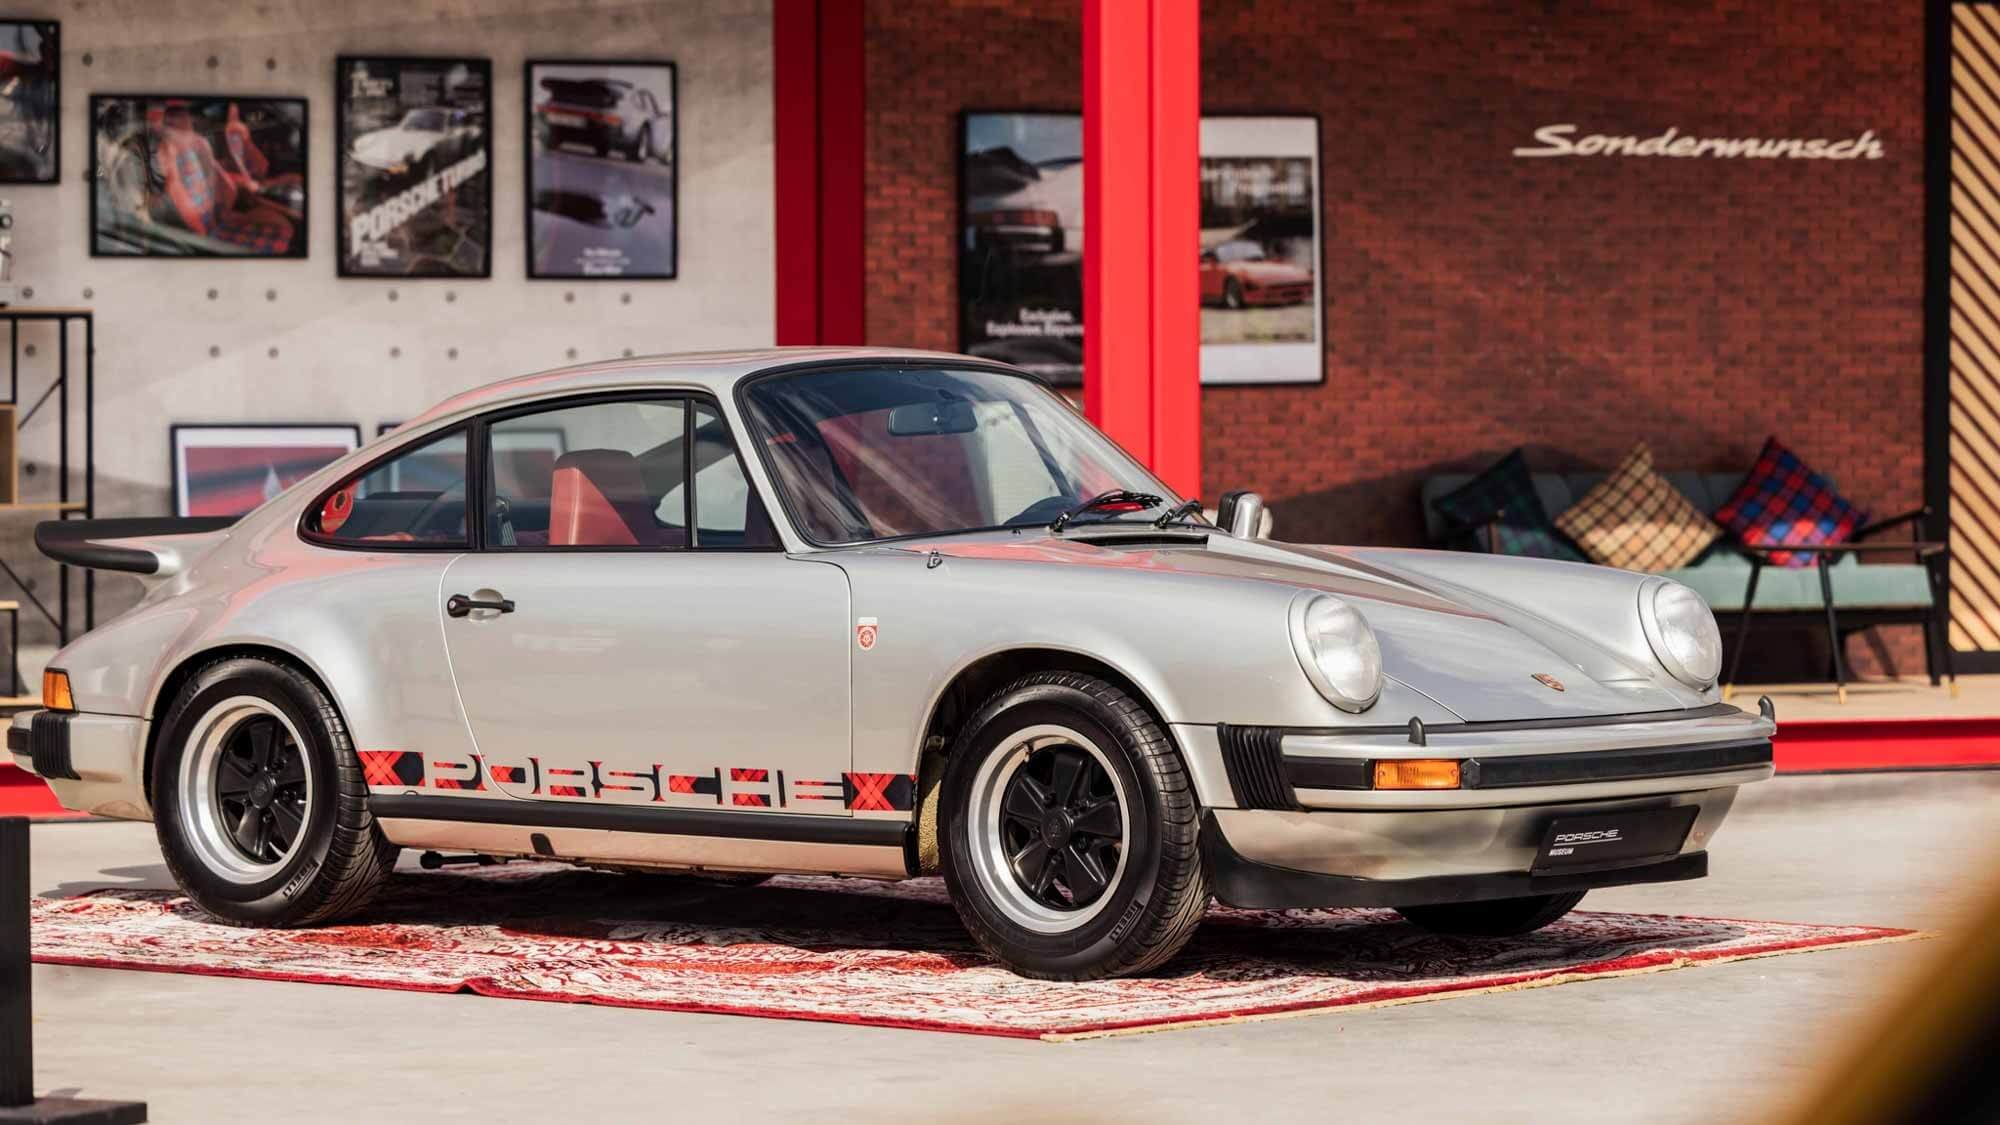 Porsche showed a unique coupe in honor of the first copy of the 911 Turbo model